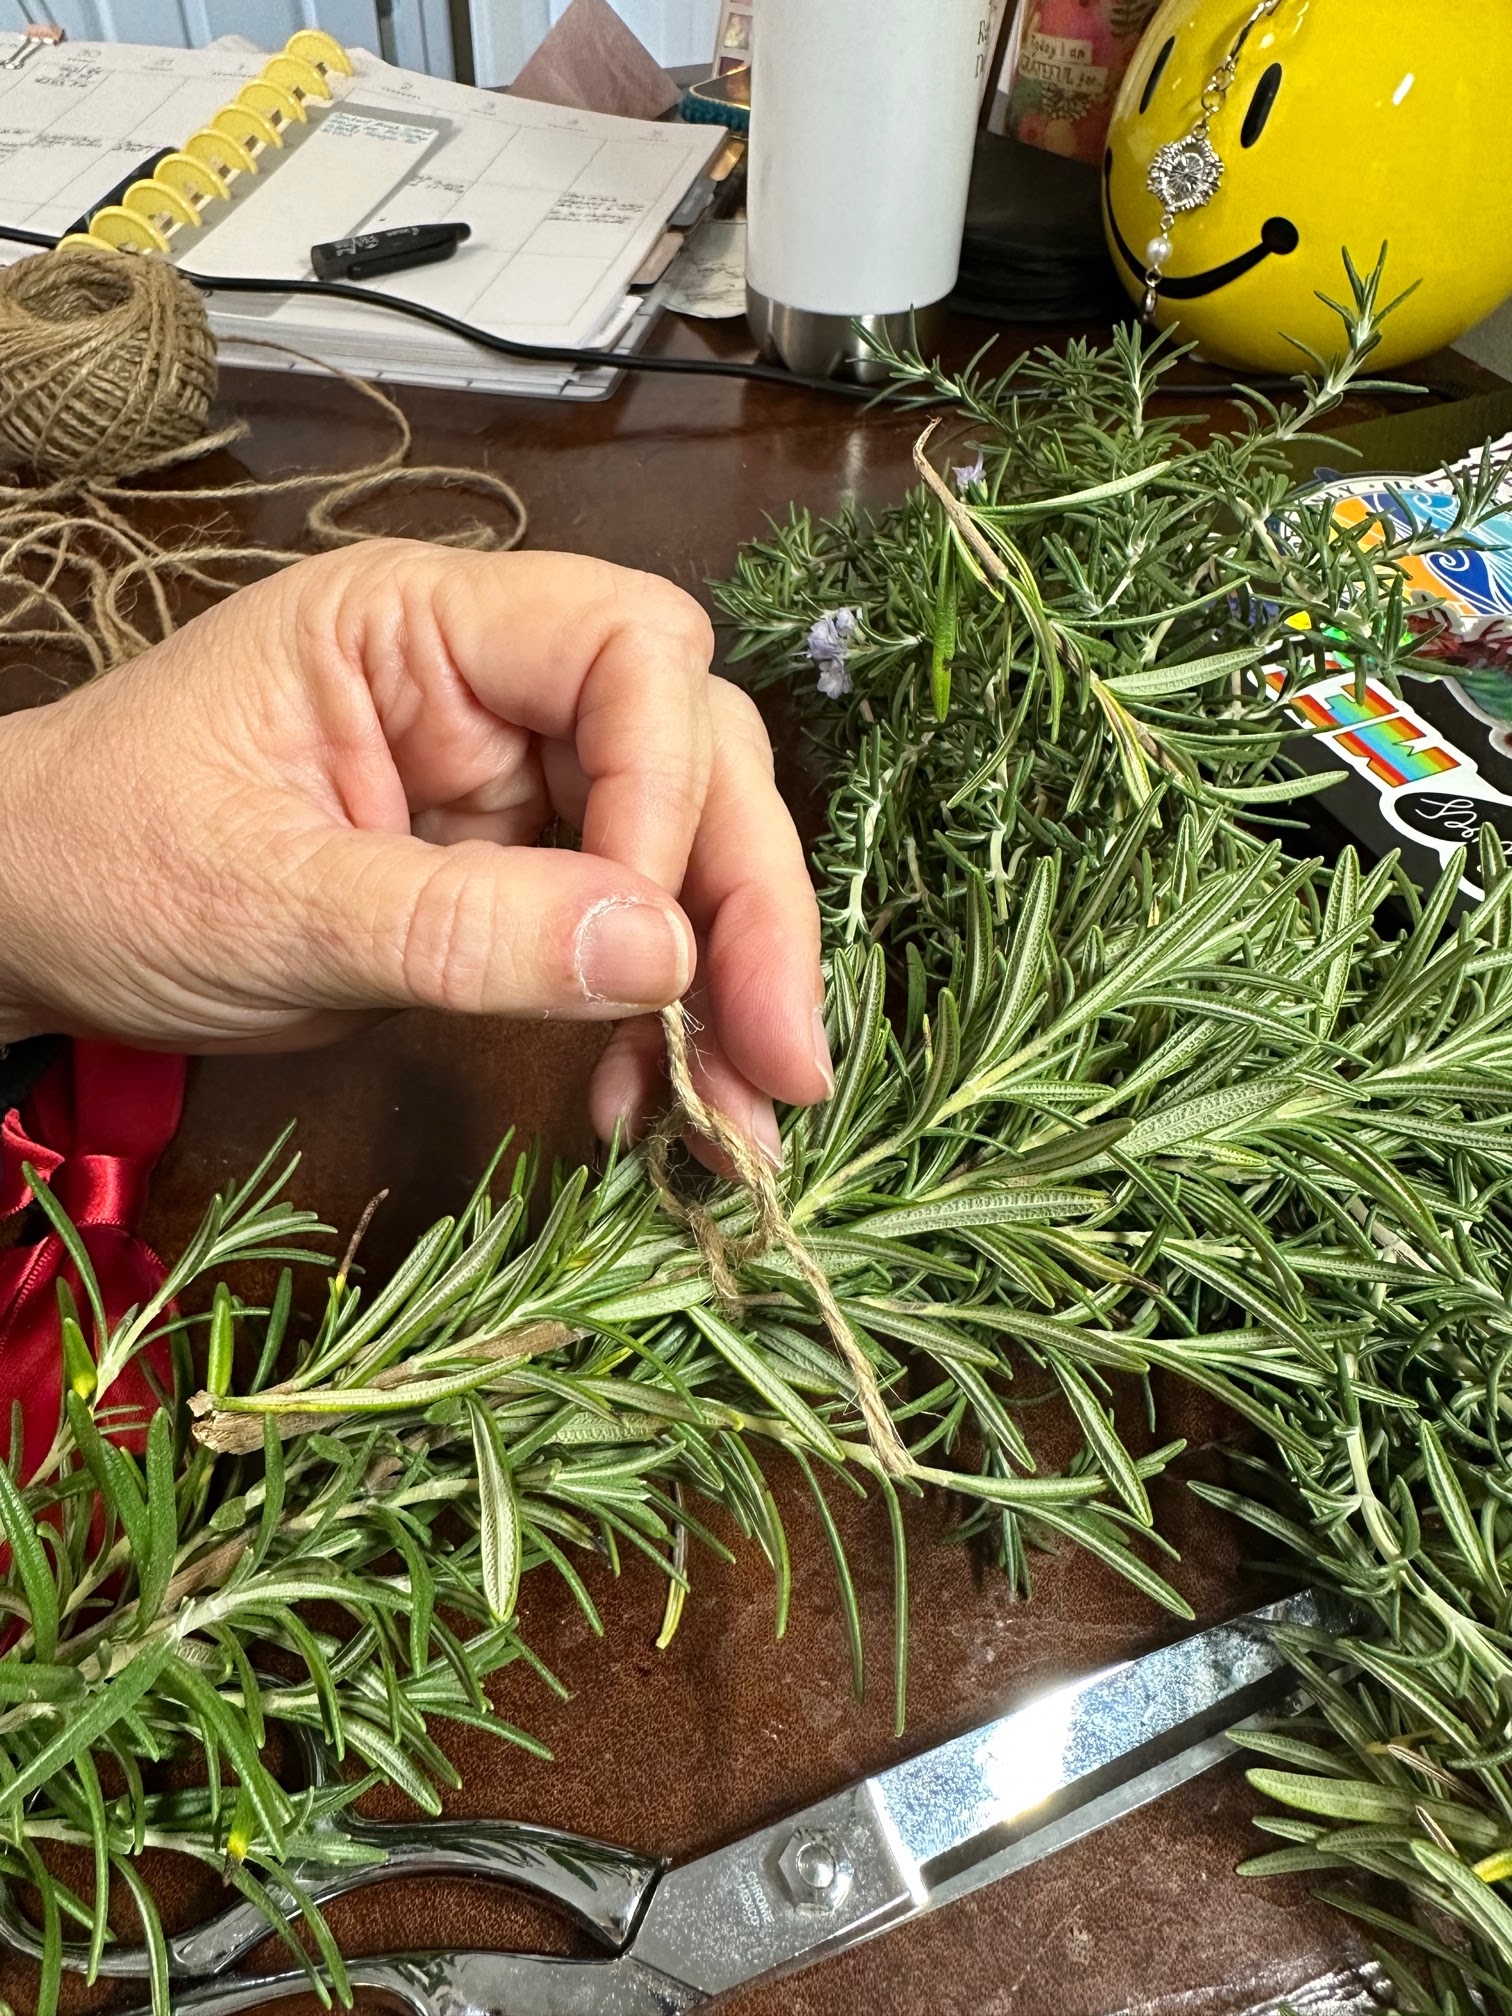 How To Make A Fragrant Wreath - Rosemary And Pines Fiber Arts